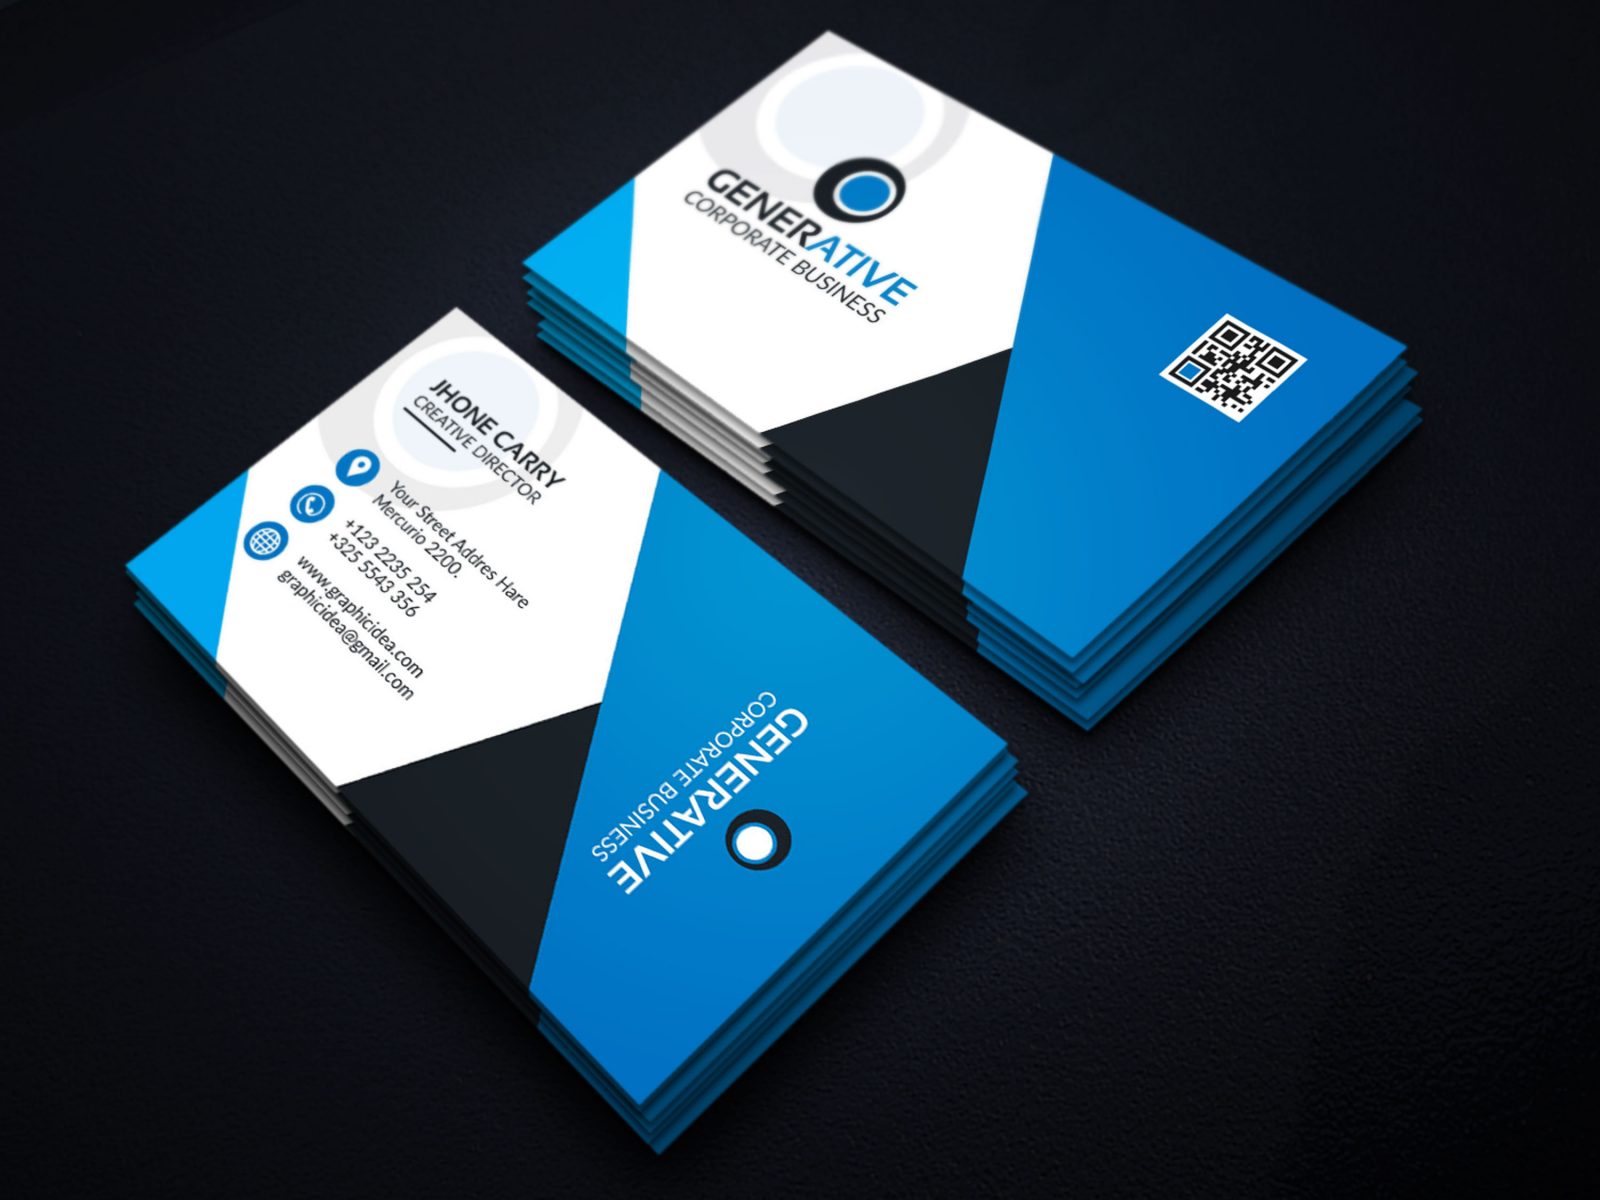 Business Card Design / Card Design | Card Design - Get the look you ...